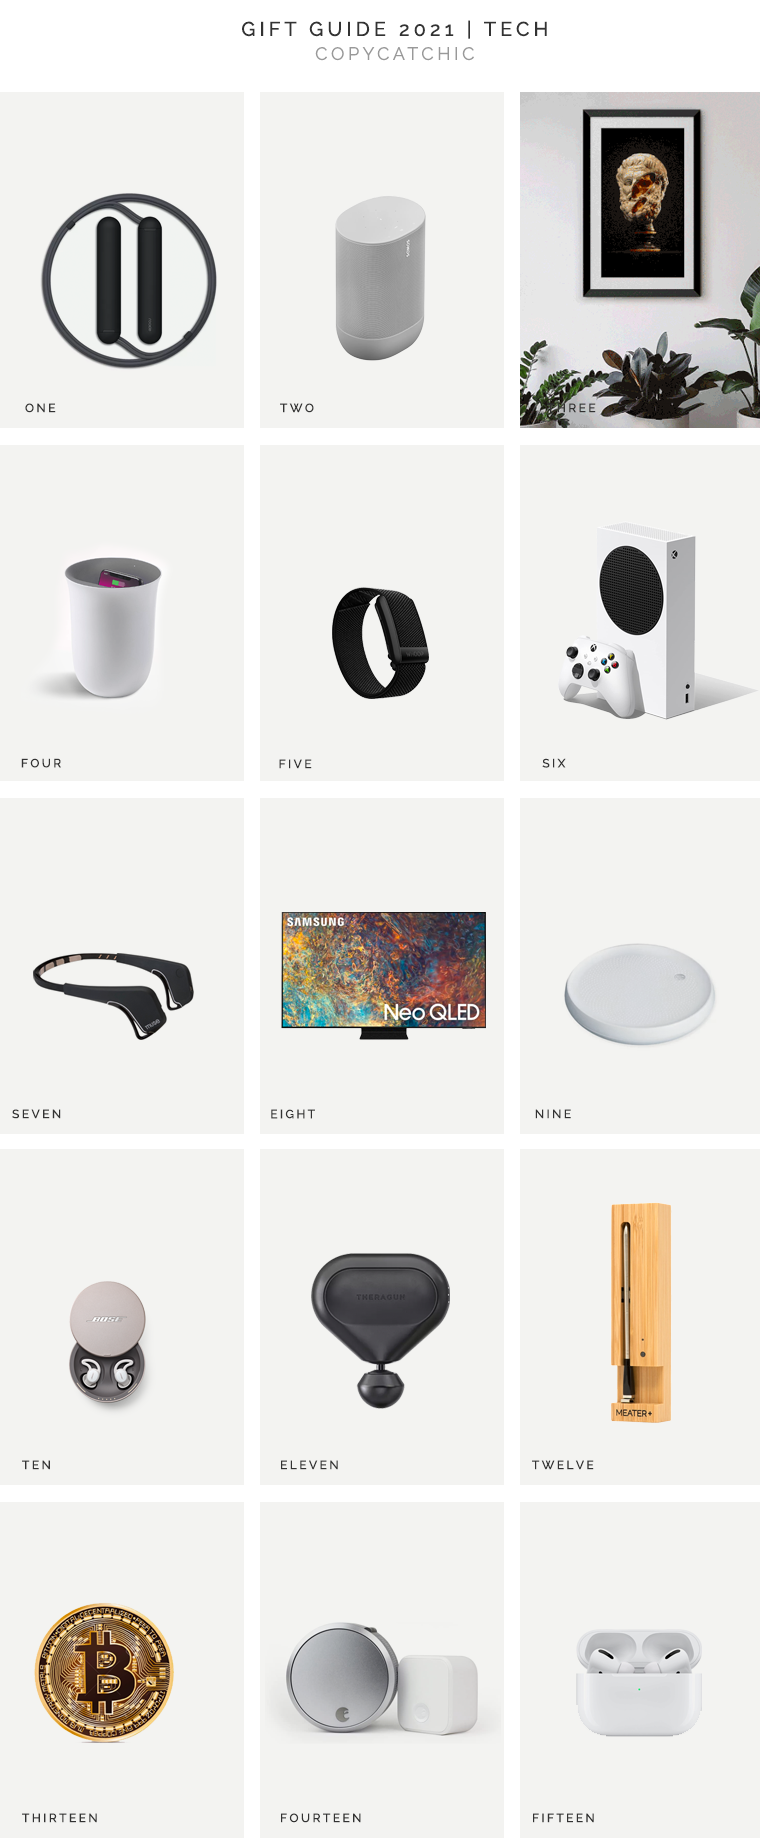 Holiday Gifts the latest tech and gadgets | Copy Cat Chic favorites for 2021 chic, minimalist, modern, gorgeous curated, reasonably priced, gift ideas for tech lovers this holiday season! | Luxe living for less